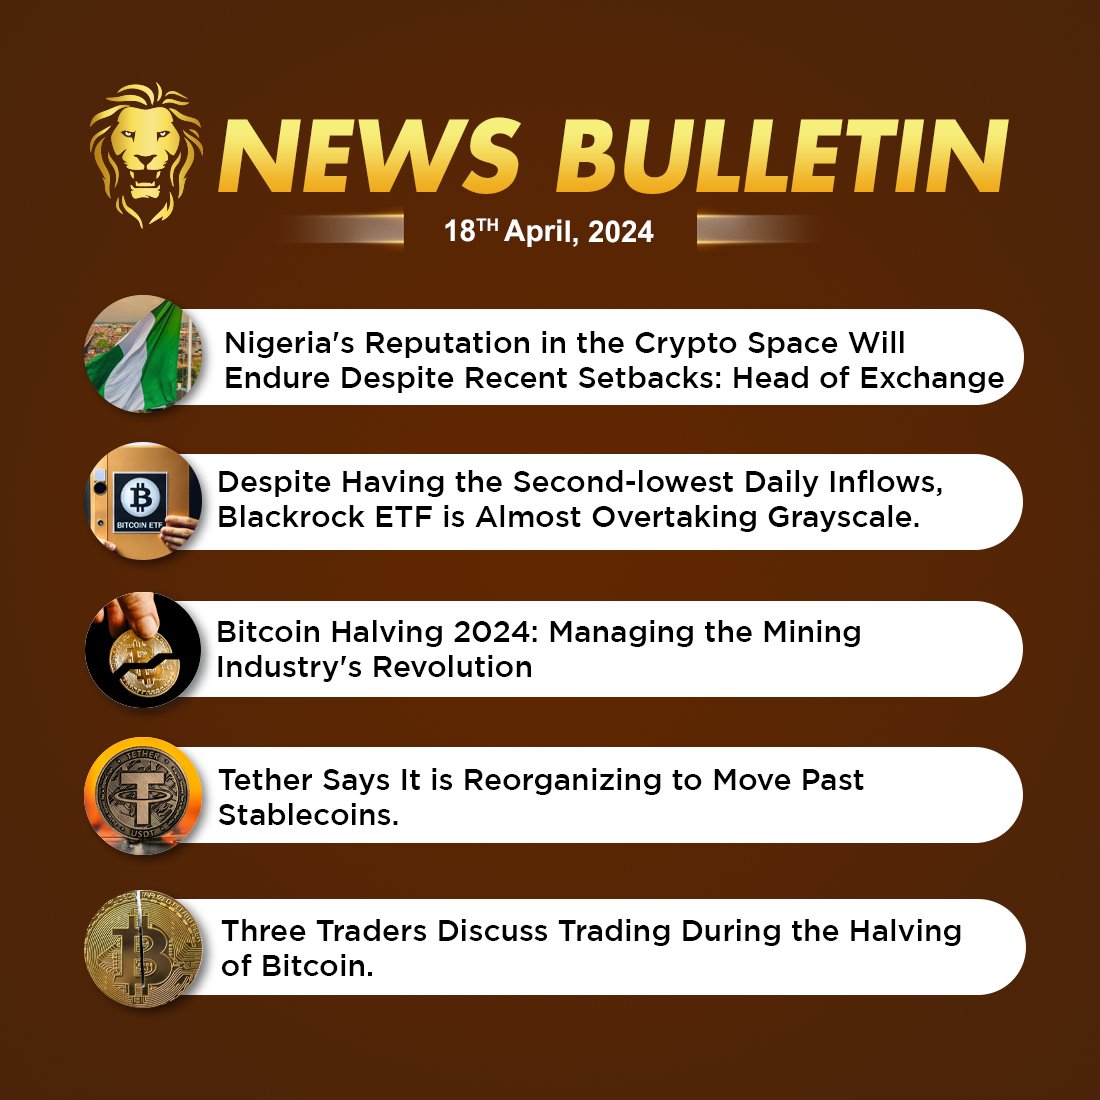 #CoinGabbar Latest News Bulletin: April 18th, 2024

Read More News: coingabbar.com/en/crypto-news…

#CryptoNews #Bitcoin #cryptoexchange  #defimarket #bitcoinhelving #Foreignexchanges #tether #cryptocurrency #cryptonews #cryptonewstoday